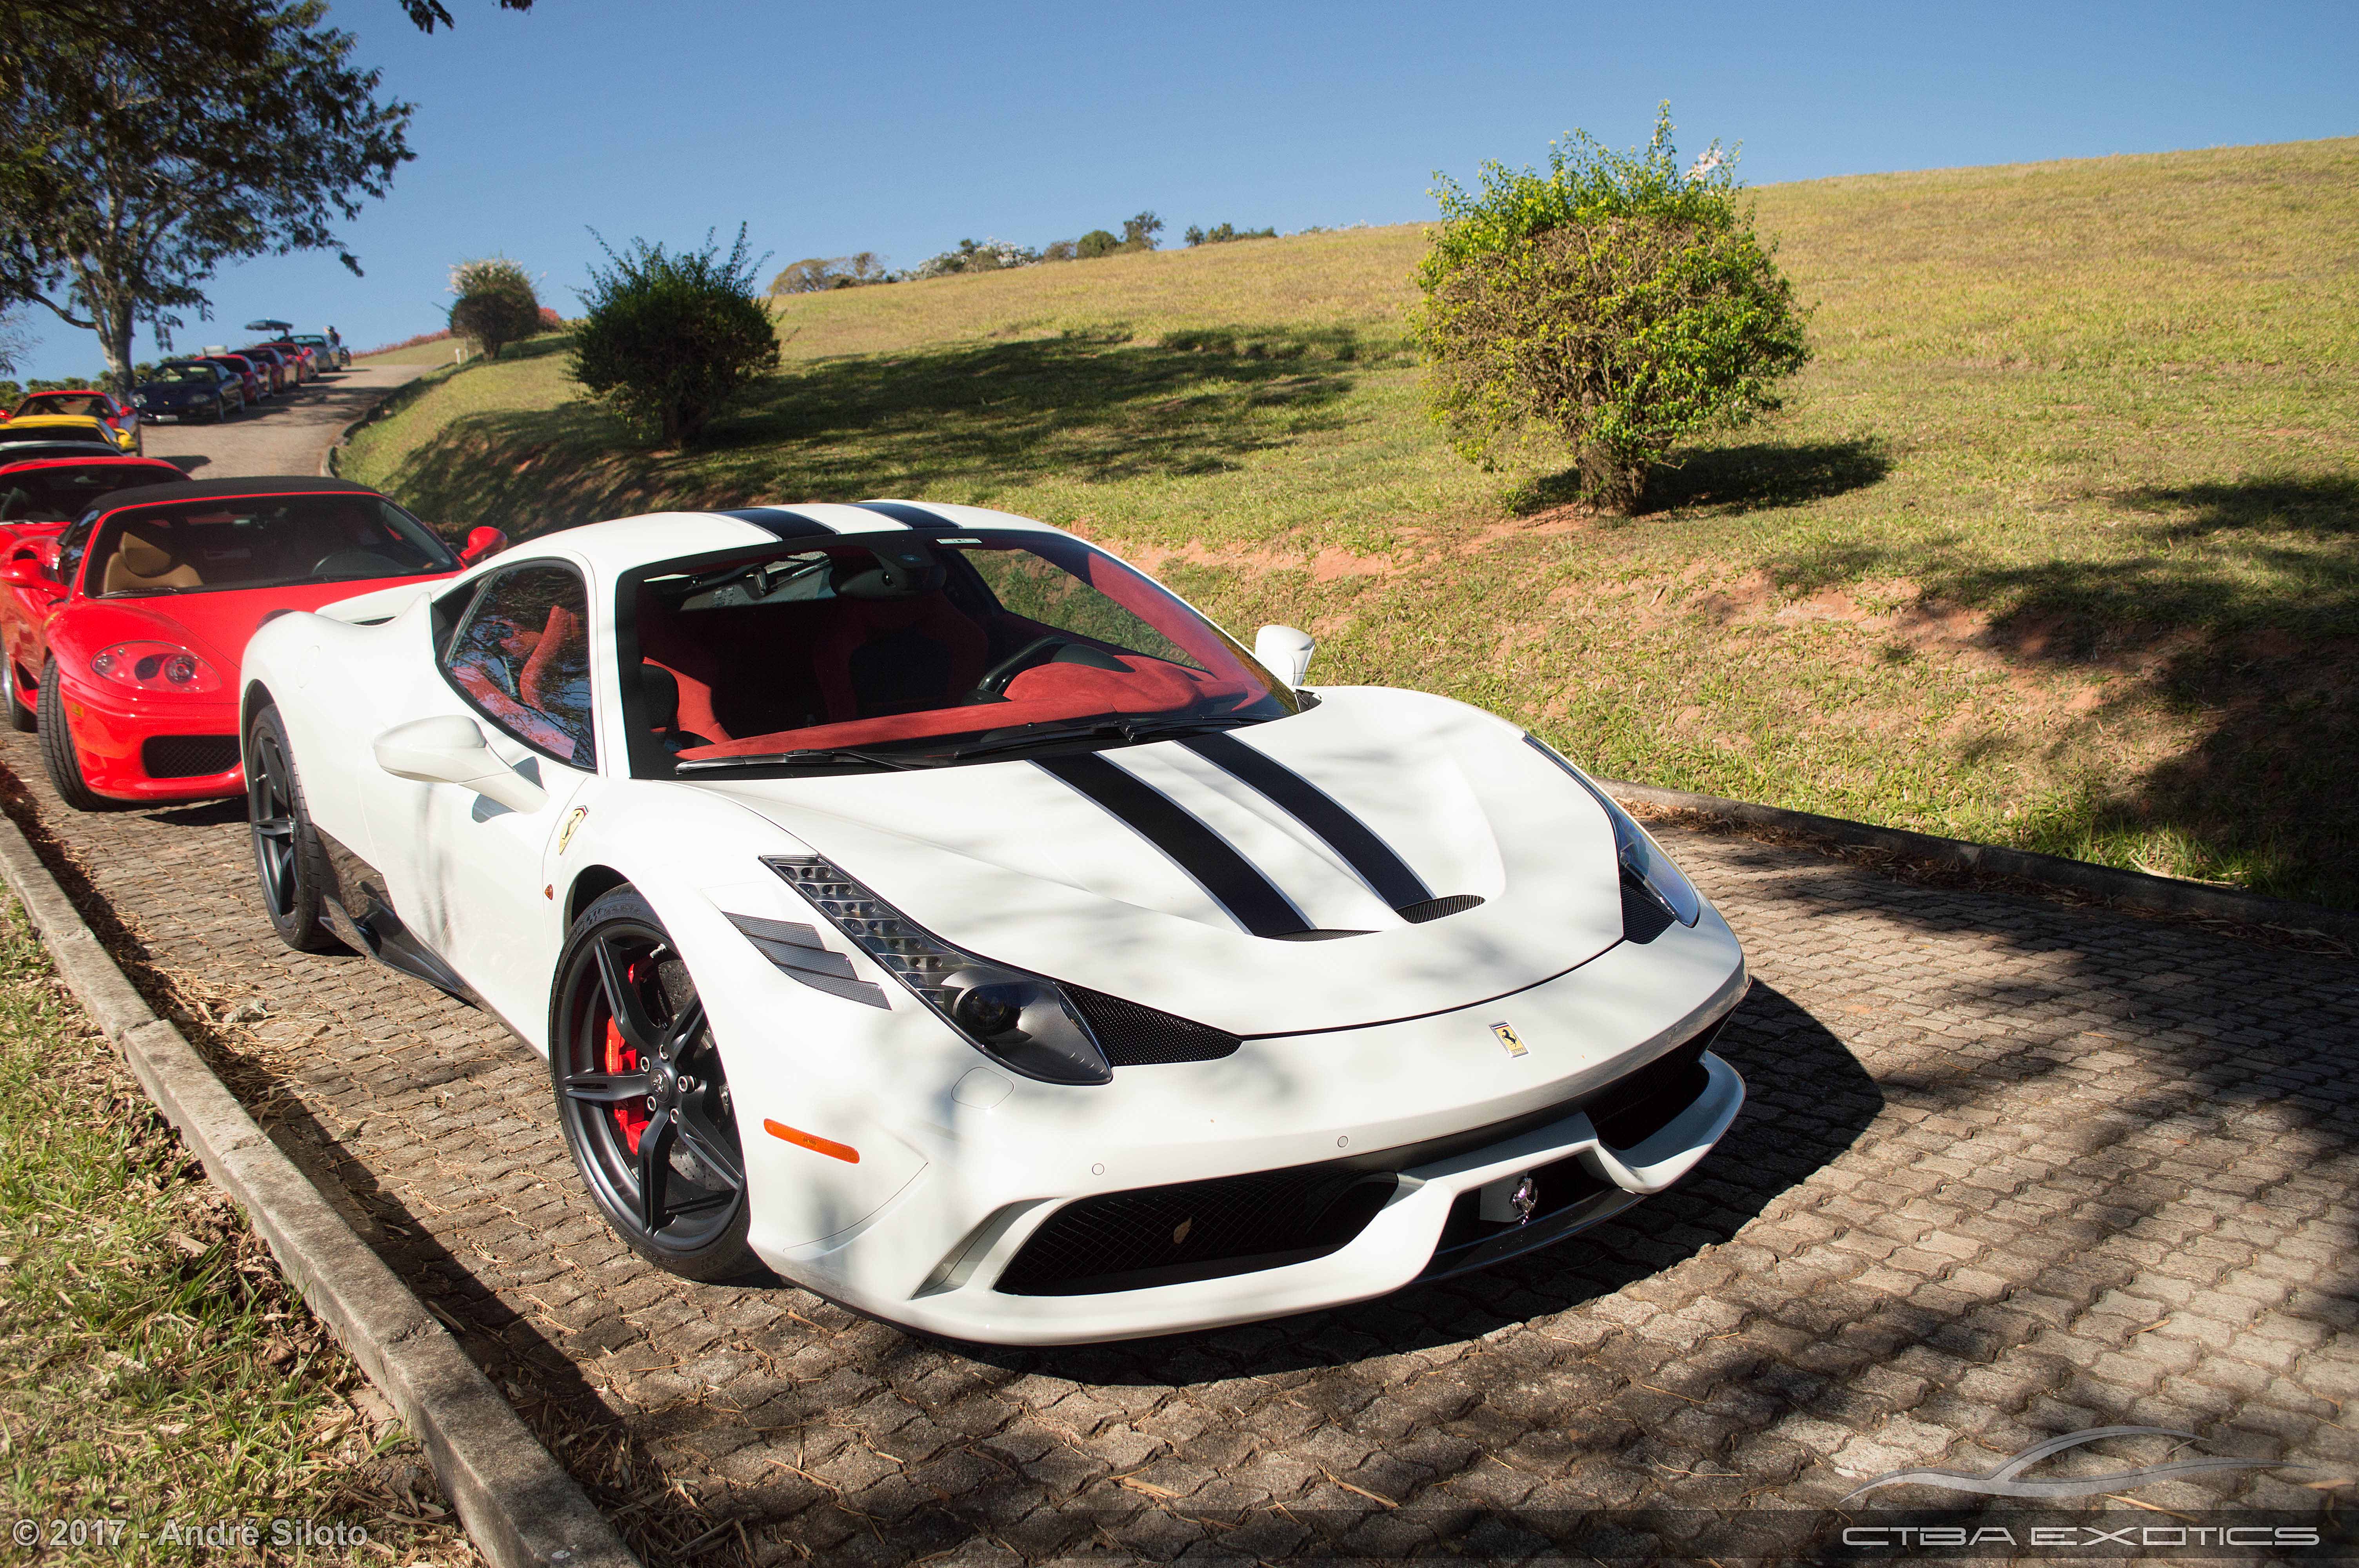 Speciale 4